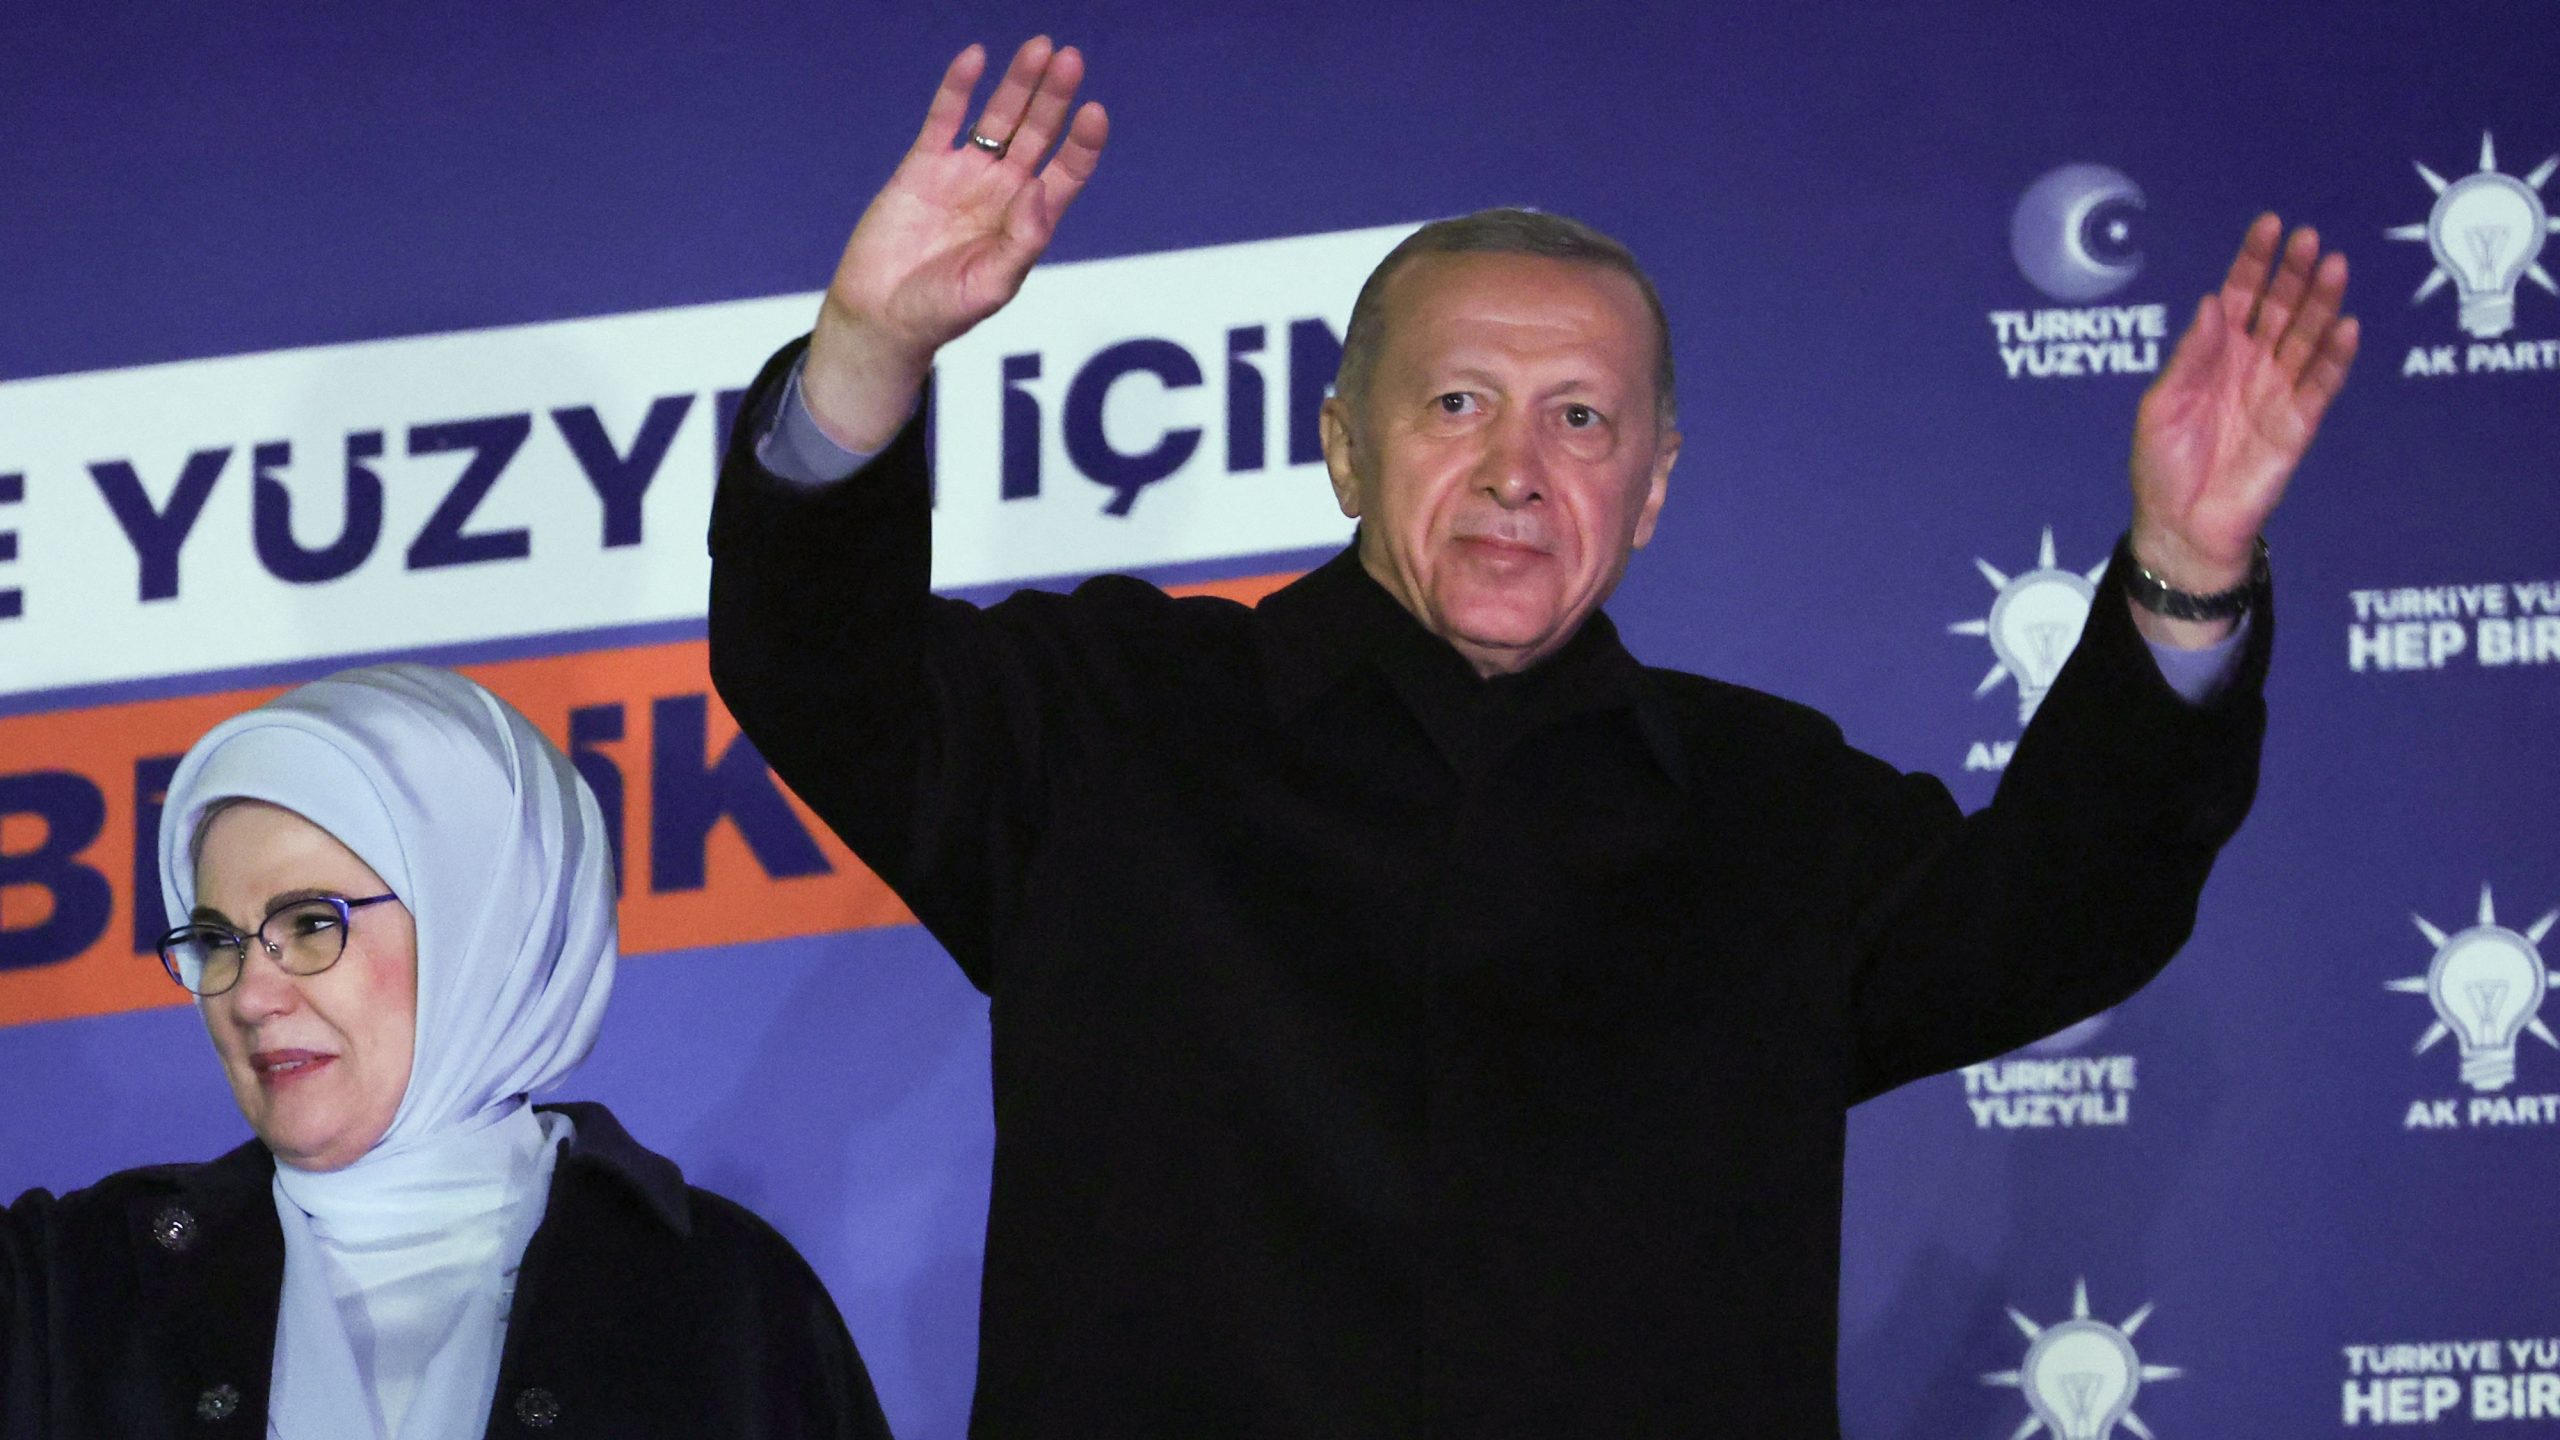 Turkish President Tayyip Erdogan (R), accompanied by his wife Ermine Erdogan (L), waves to supporters at the AK Party headquarters in Ankara, Turkey May 15, 2023. Turkey is braced for its first election runoff after a night of high drama showed President Recep Tayyip Erdogan edging ahead of his secular rival but failing to secure a first-round win. (Photo by Adem ALTAN / AFP)